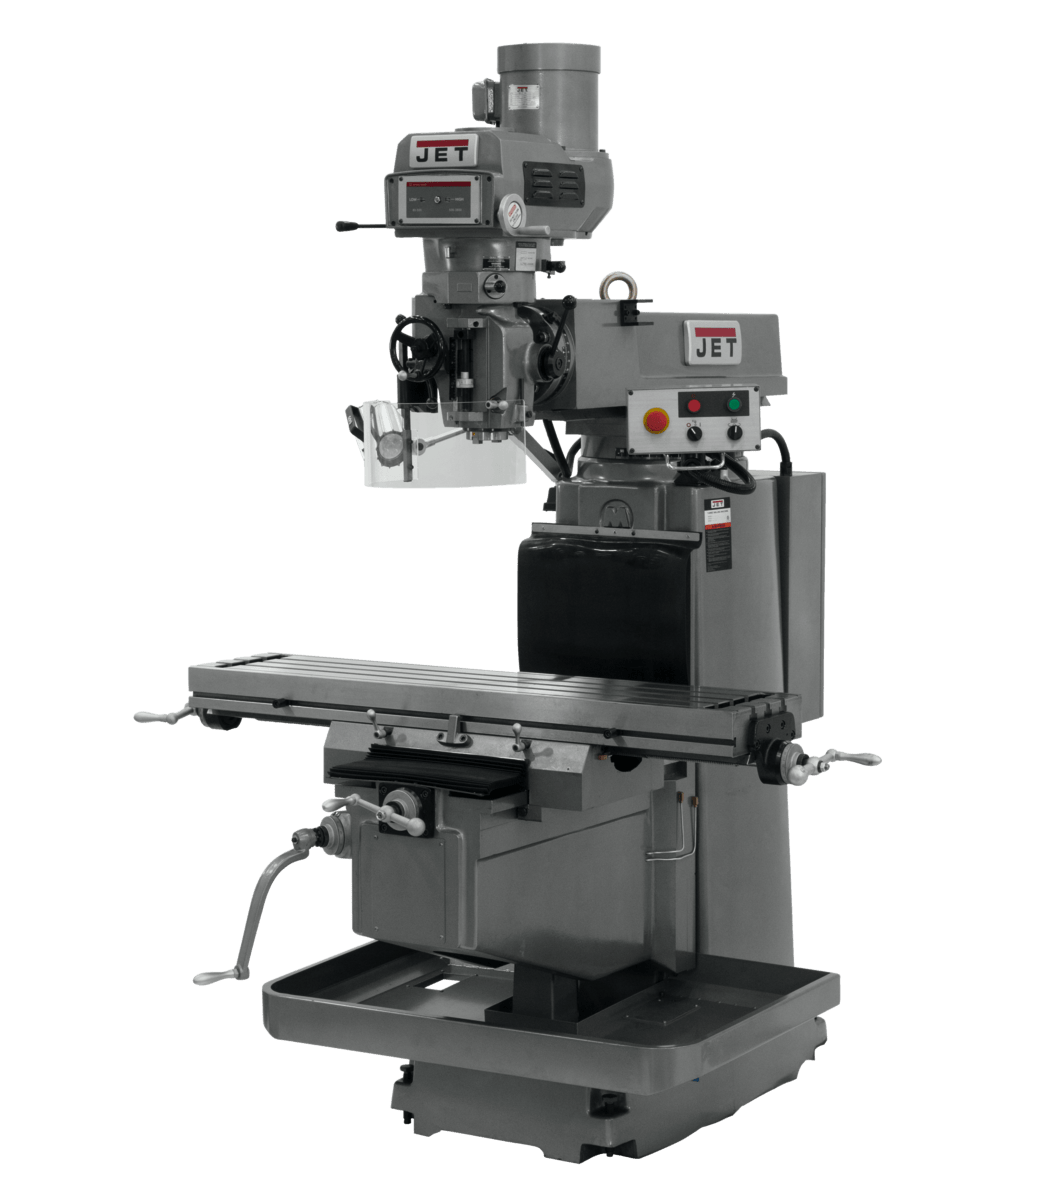 JTM-1254VS with 3-Axis ACU-RITE G-2 MILLPOWER CNC with Air Power Drawbar - Jet